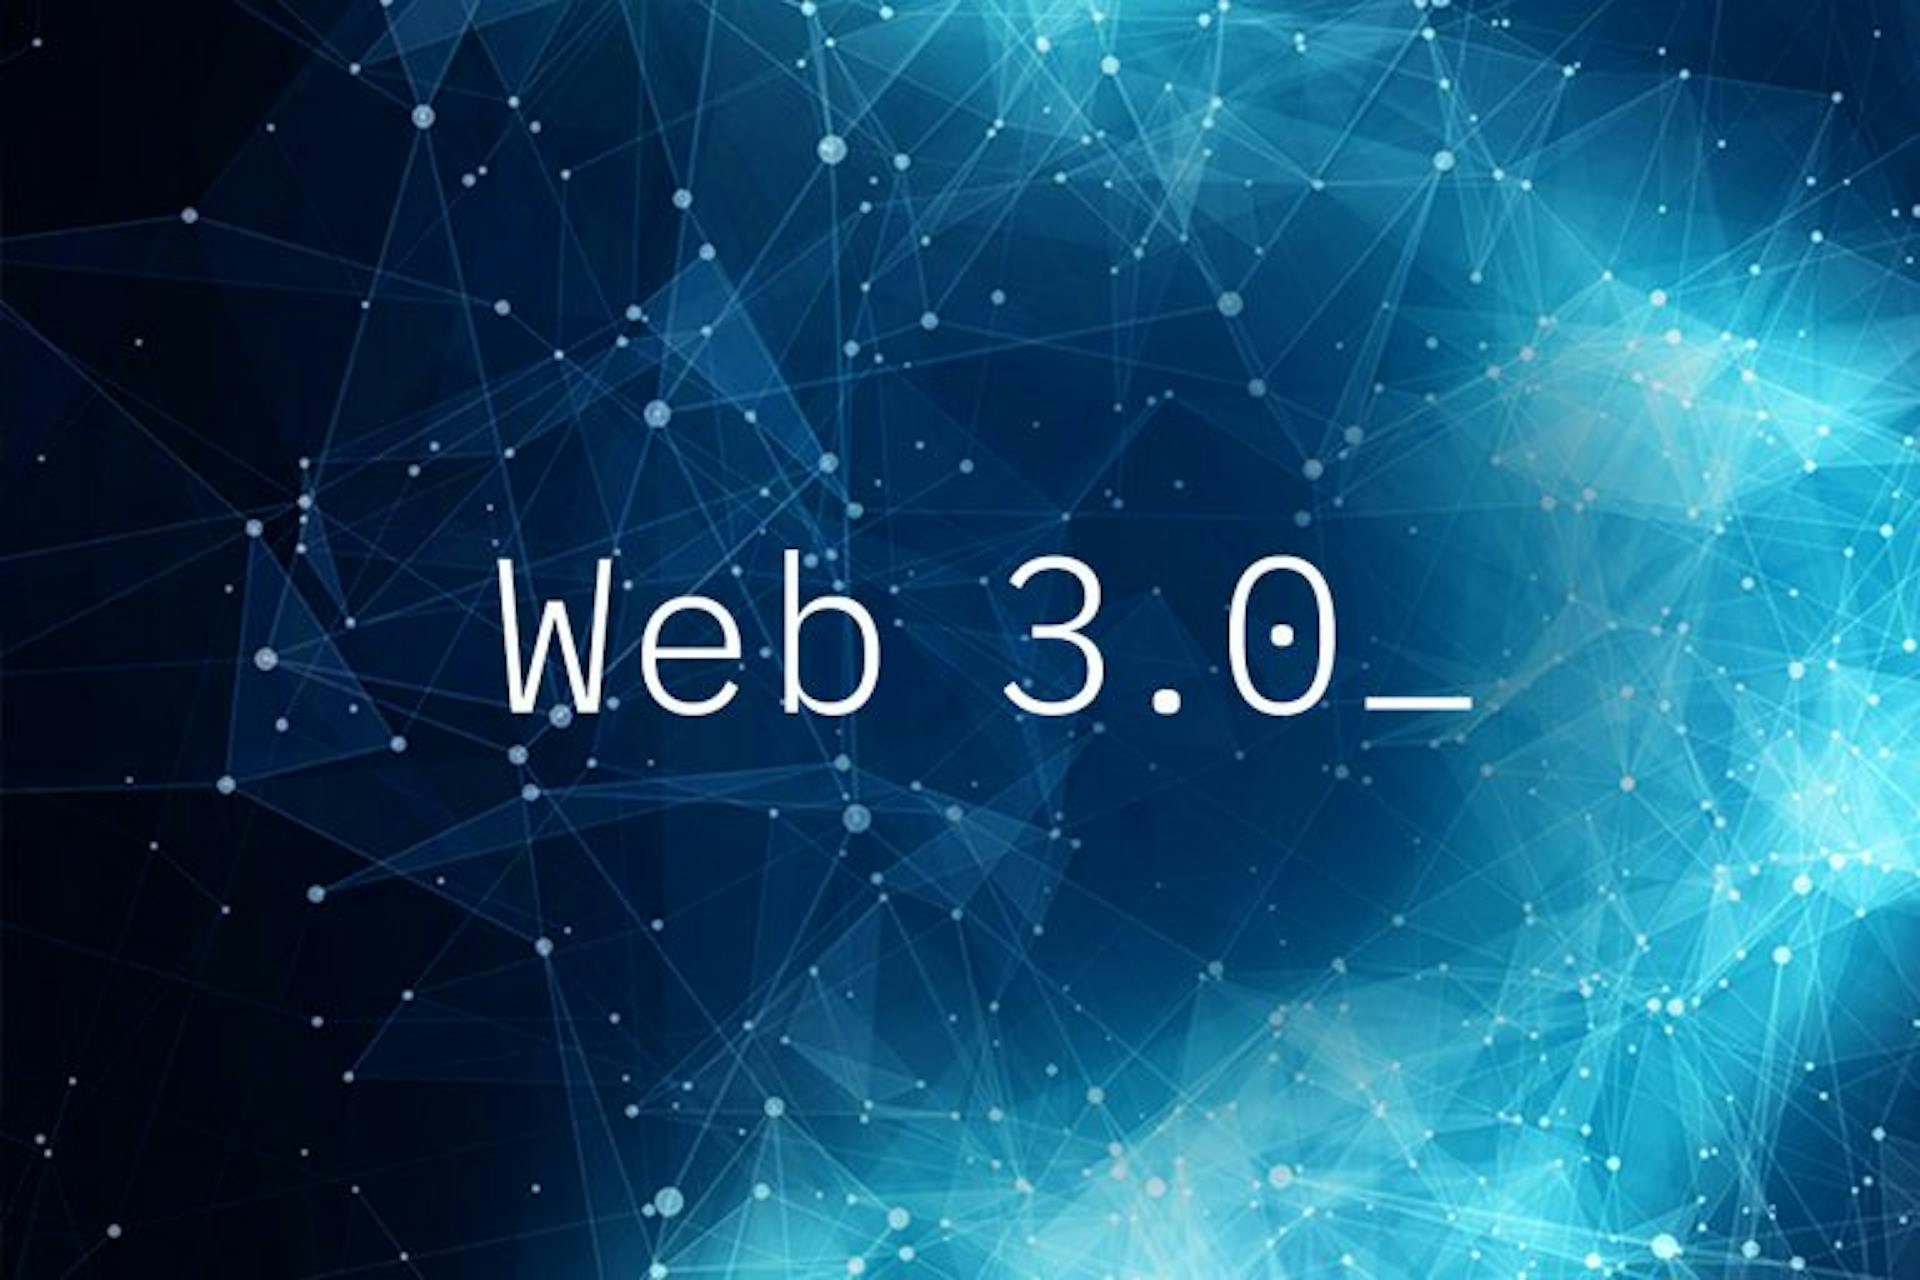 Web 3.0 guarantees privacy and freedom